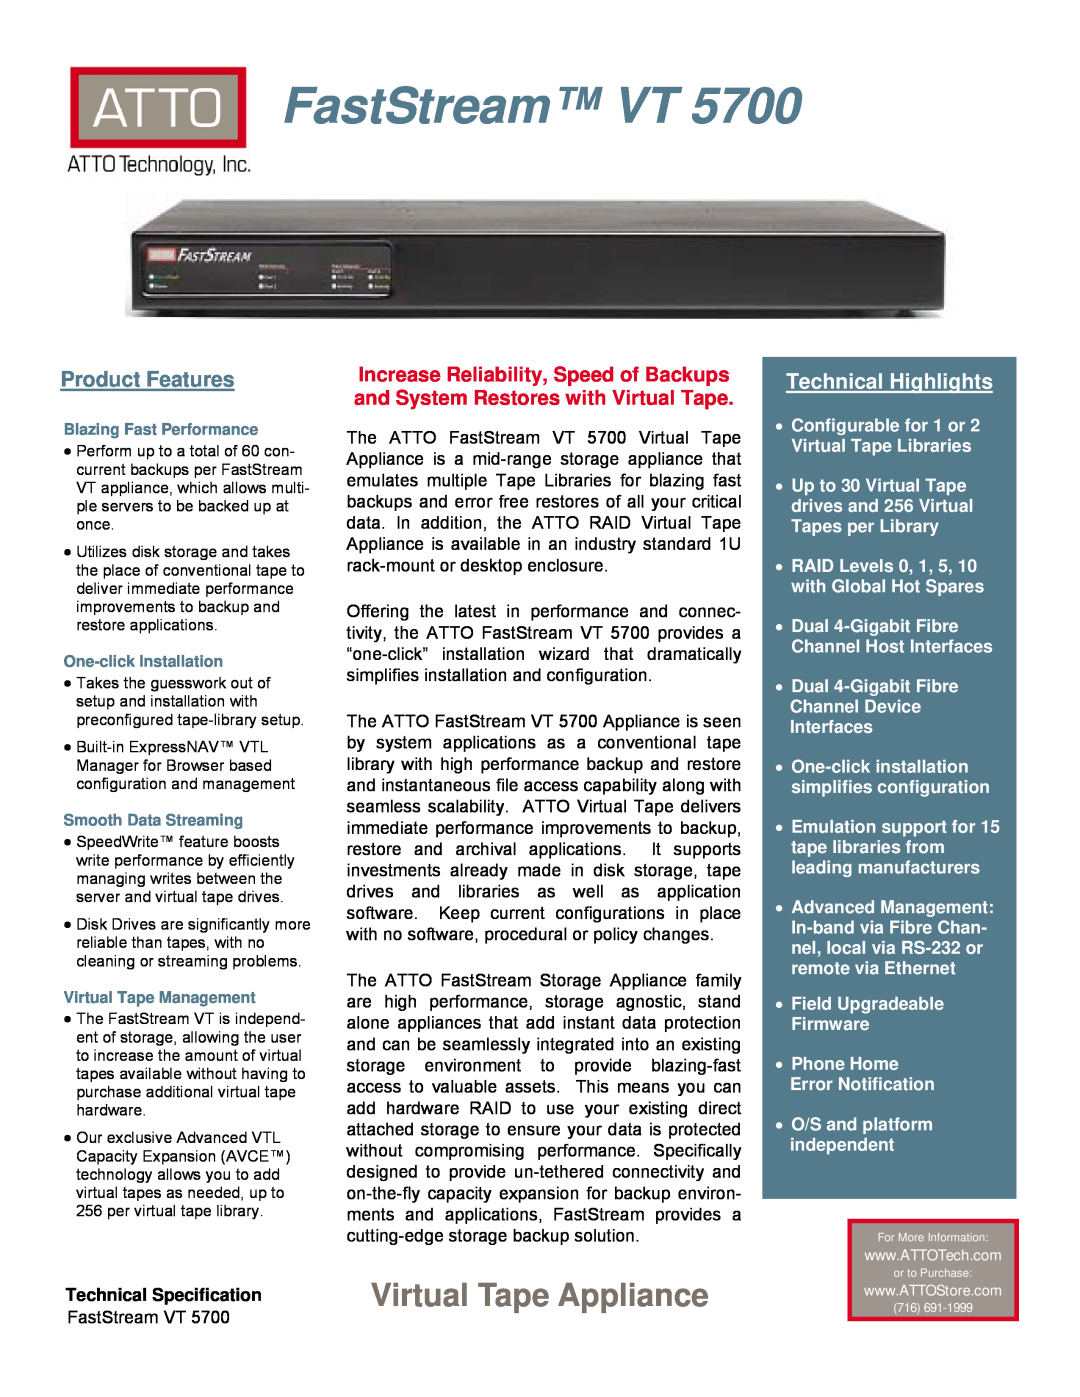 ATTO Technology VT 5700 manual Technical Specification, FastStream VT, Virtual Tape Appliance, Product Features 